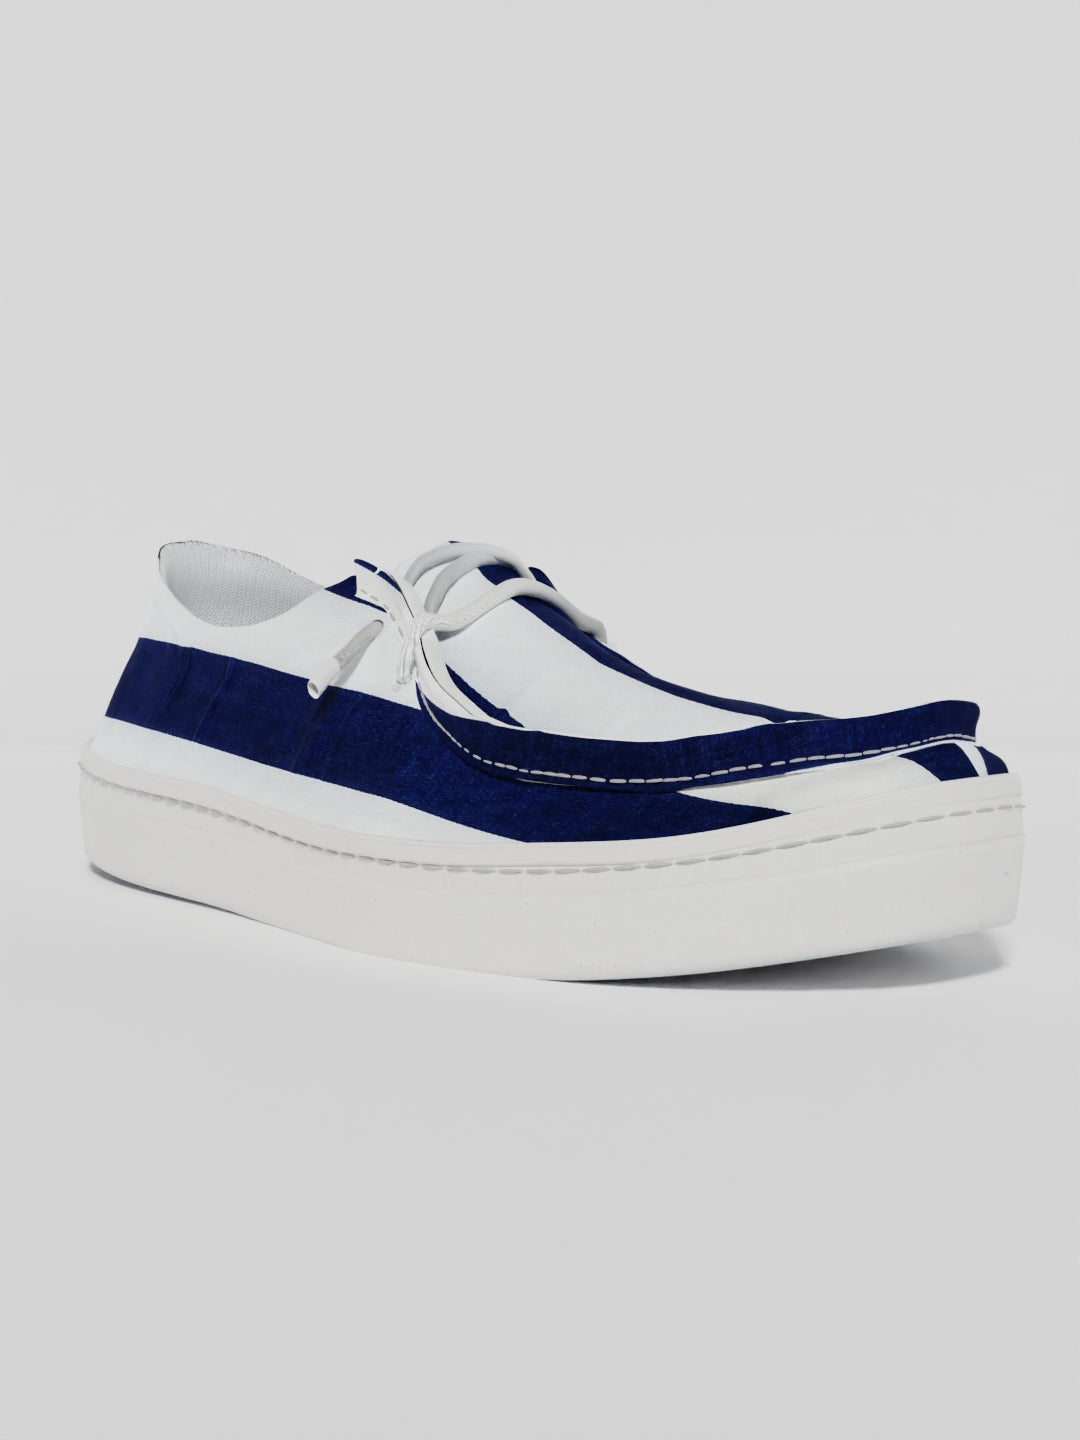 The Luna Navy and White Stripes